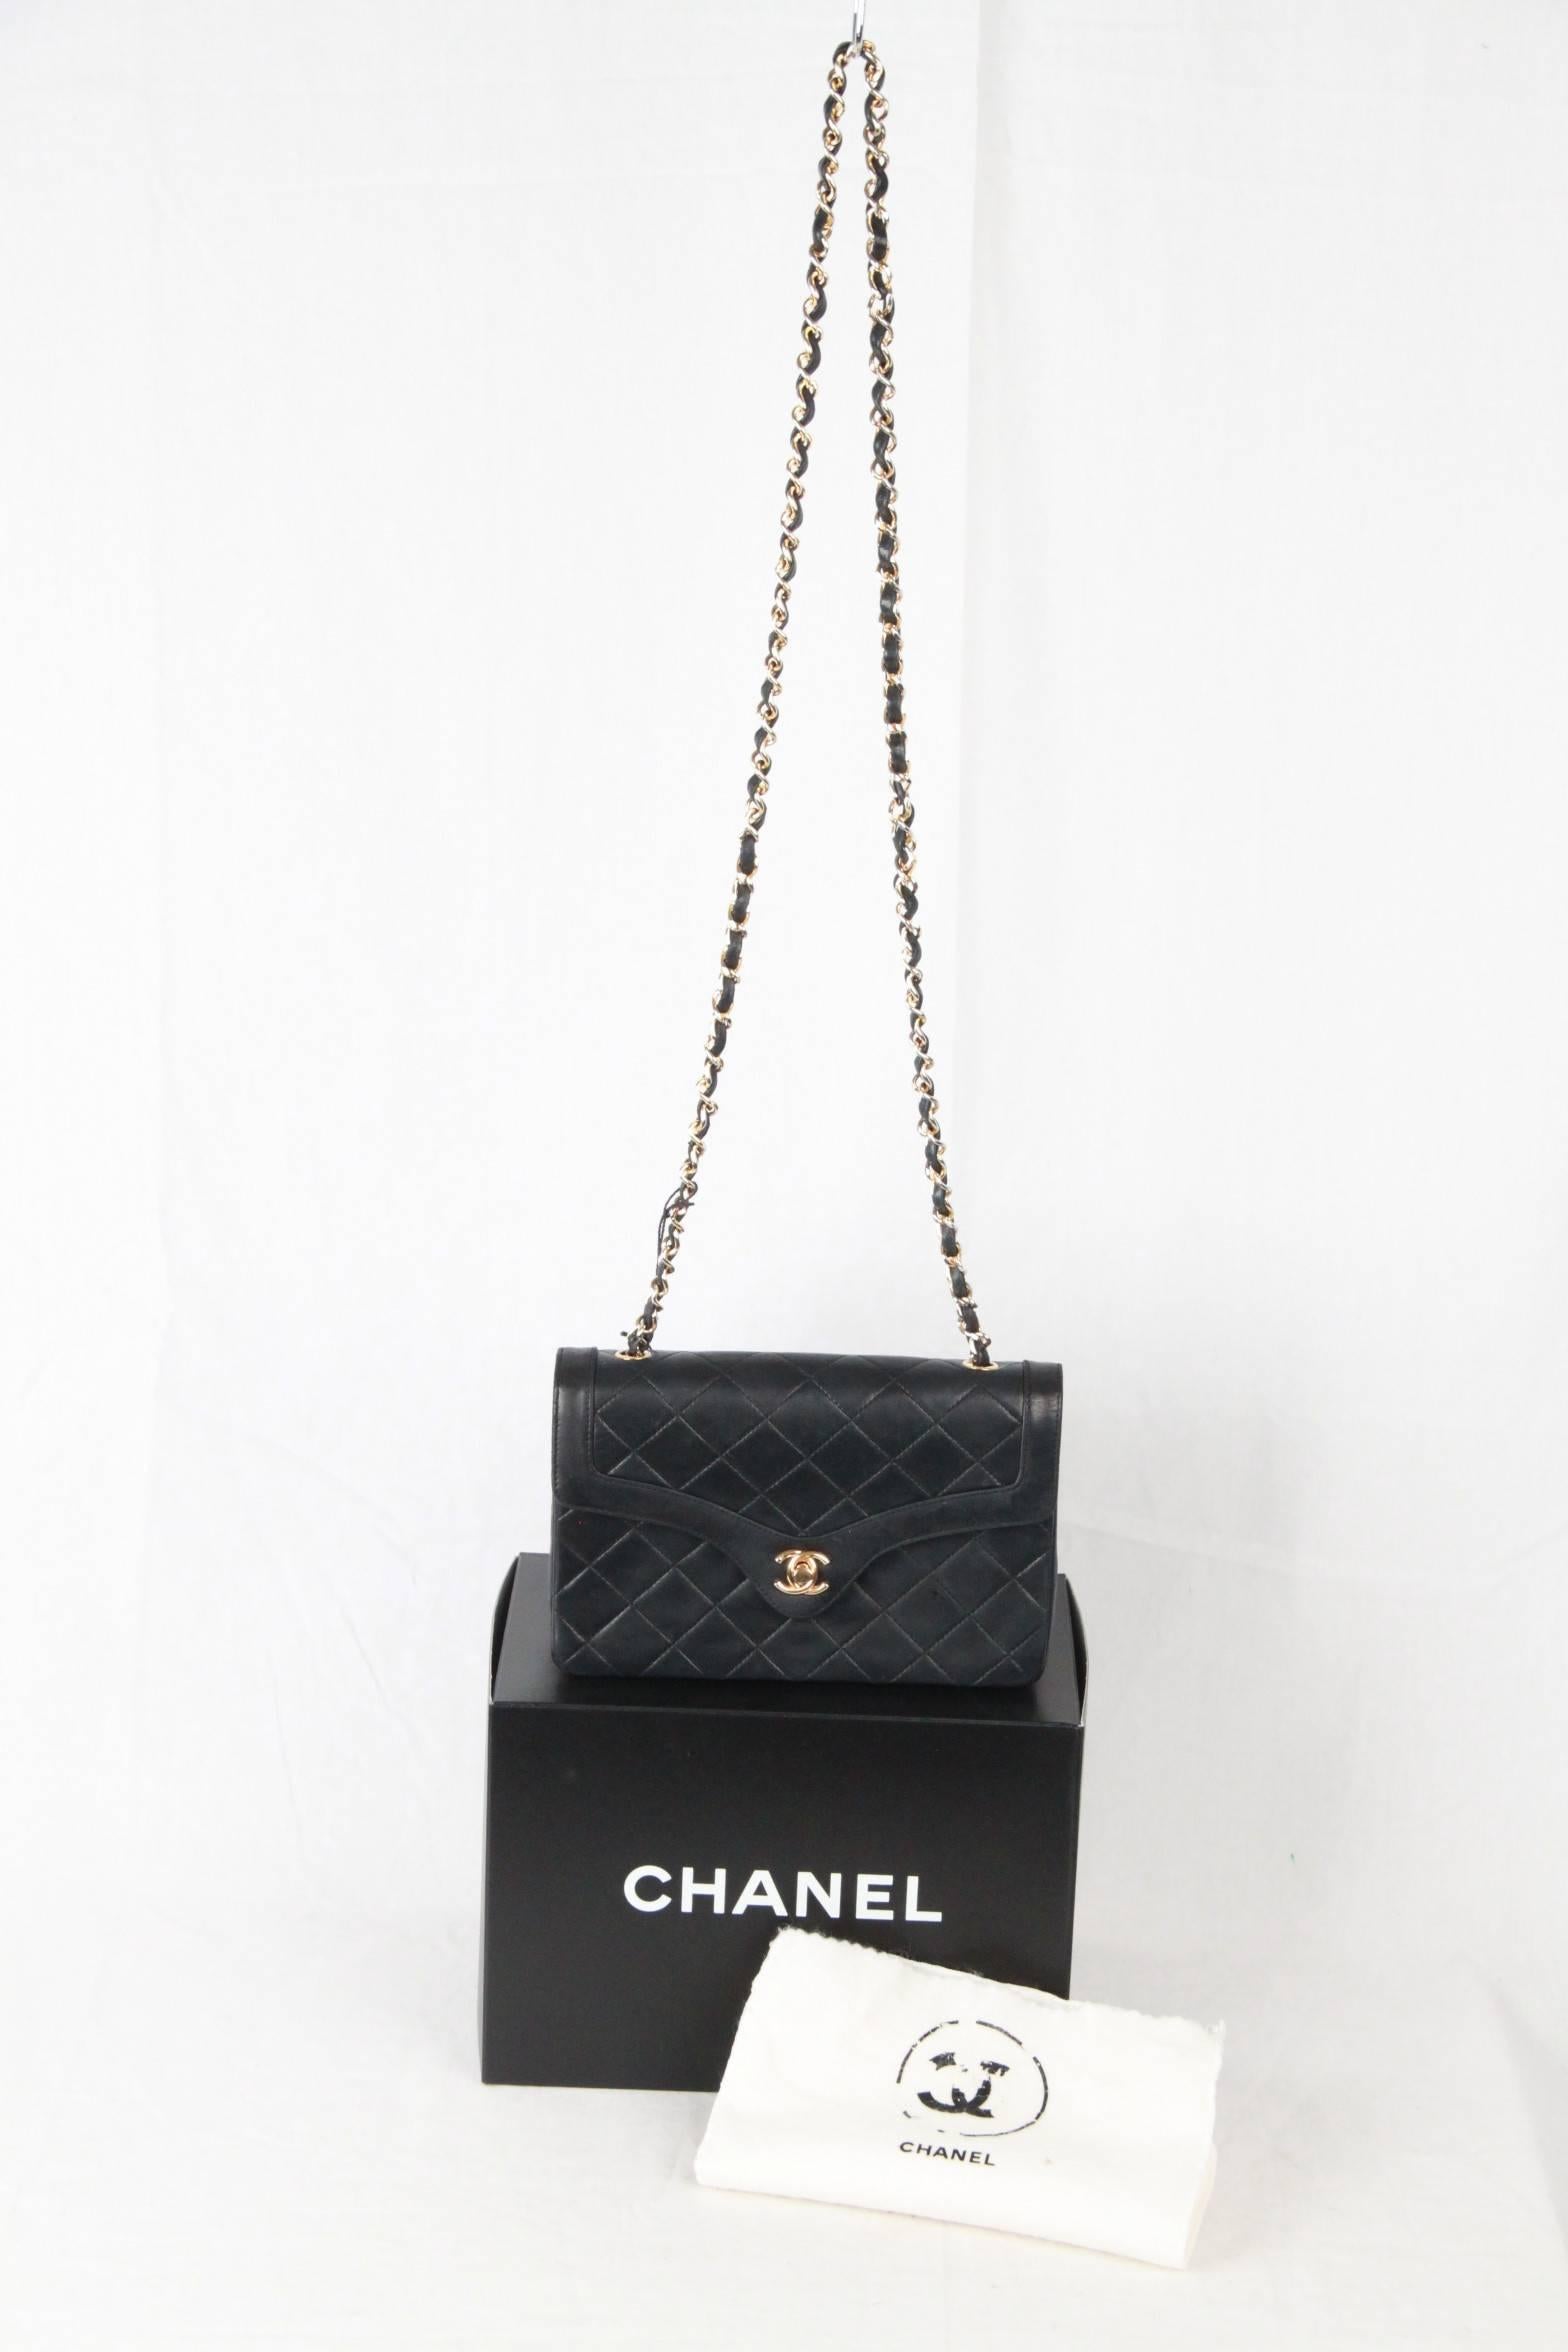 Chanel Vintage Quilted Flap Bag with Smooth Trim and gold hardware from the 1991. Blue leather crossbody bag with the classic chain and leather shoulder strap. Chanel CC turn lock opens the single flap to reveal the bordeaux lambskin-lined interior.